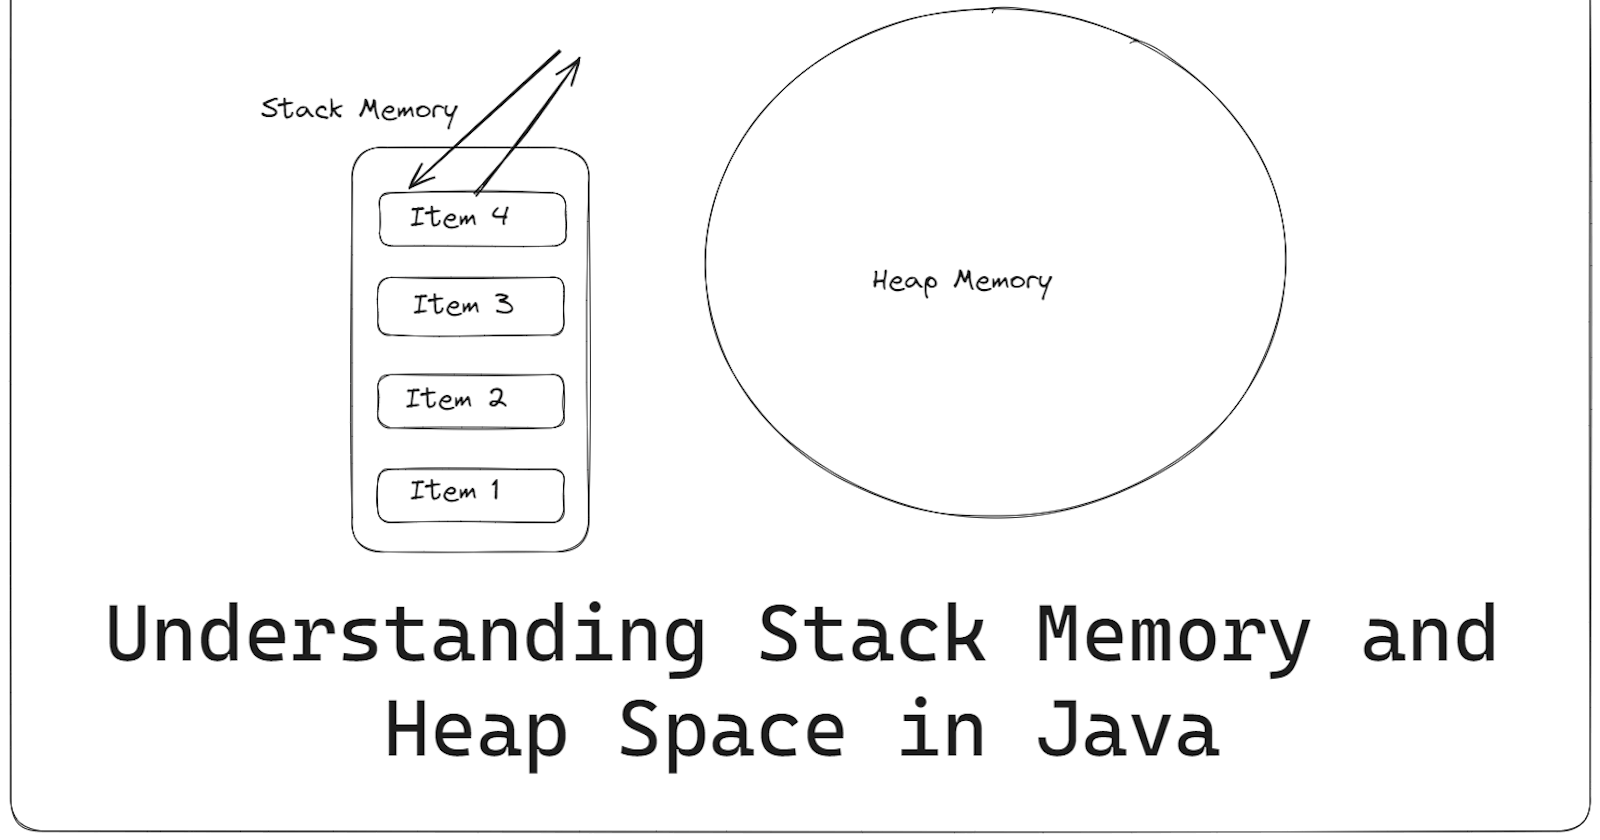 Understanding Stack Memory and Heap Space in Java